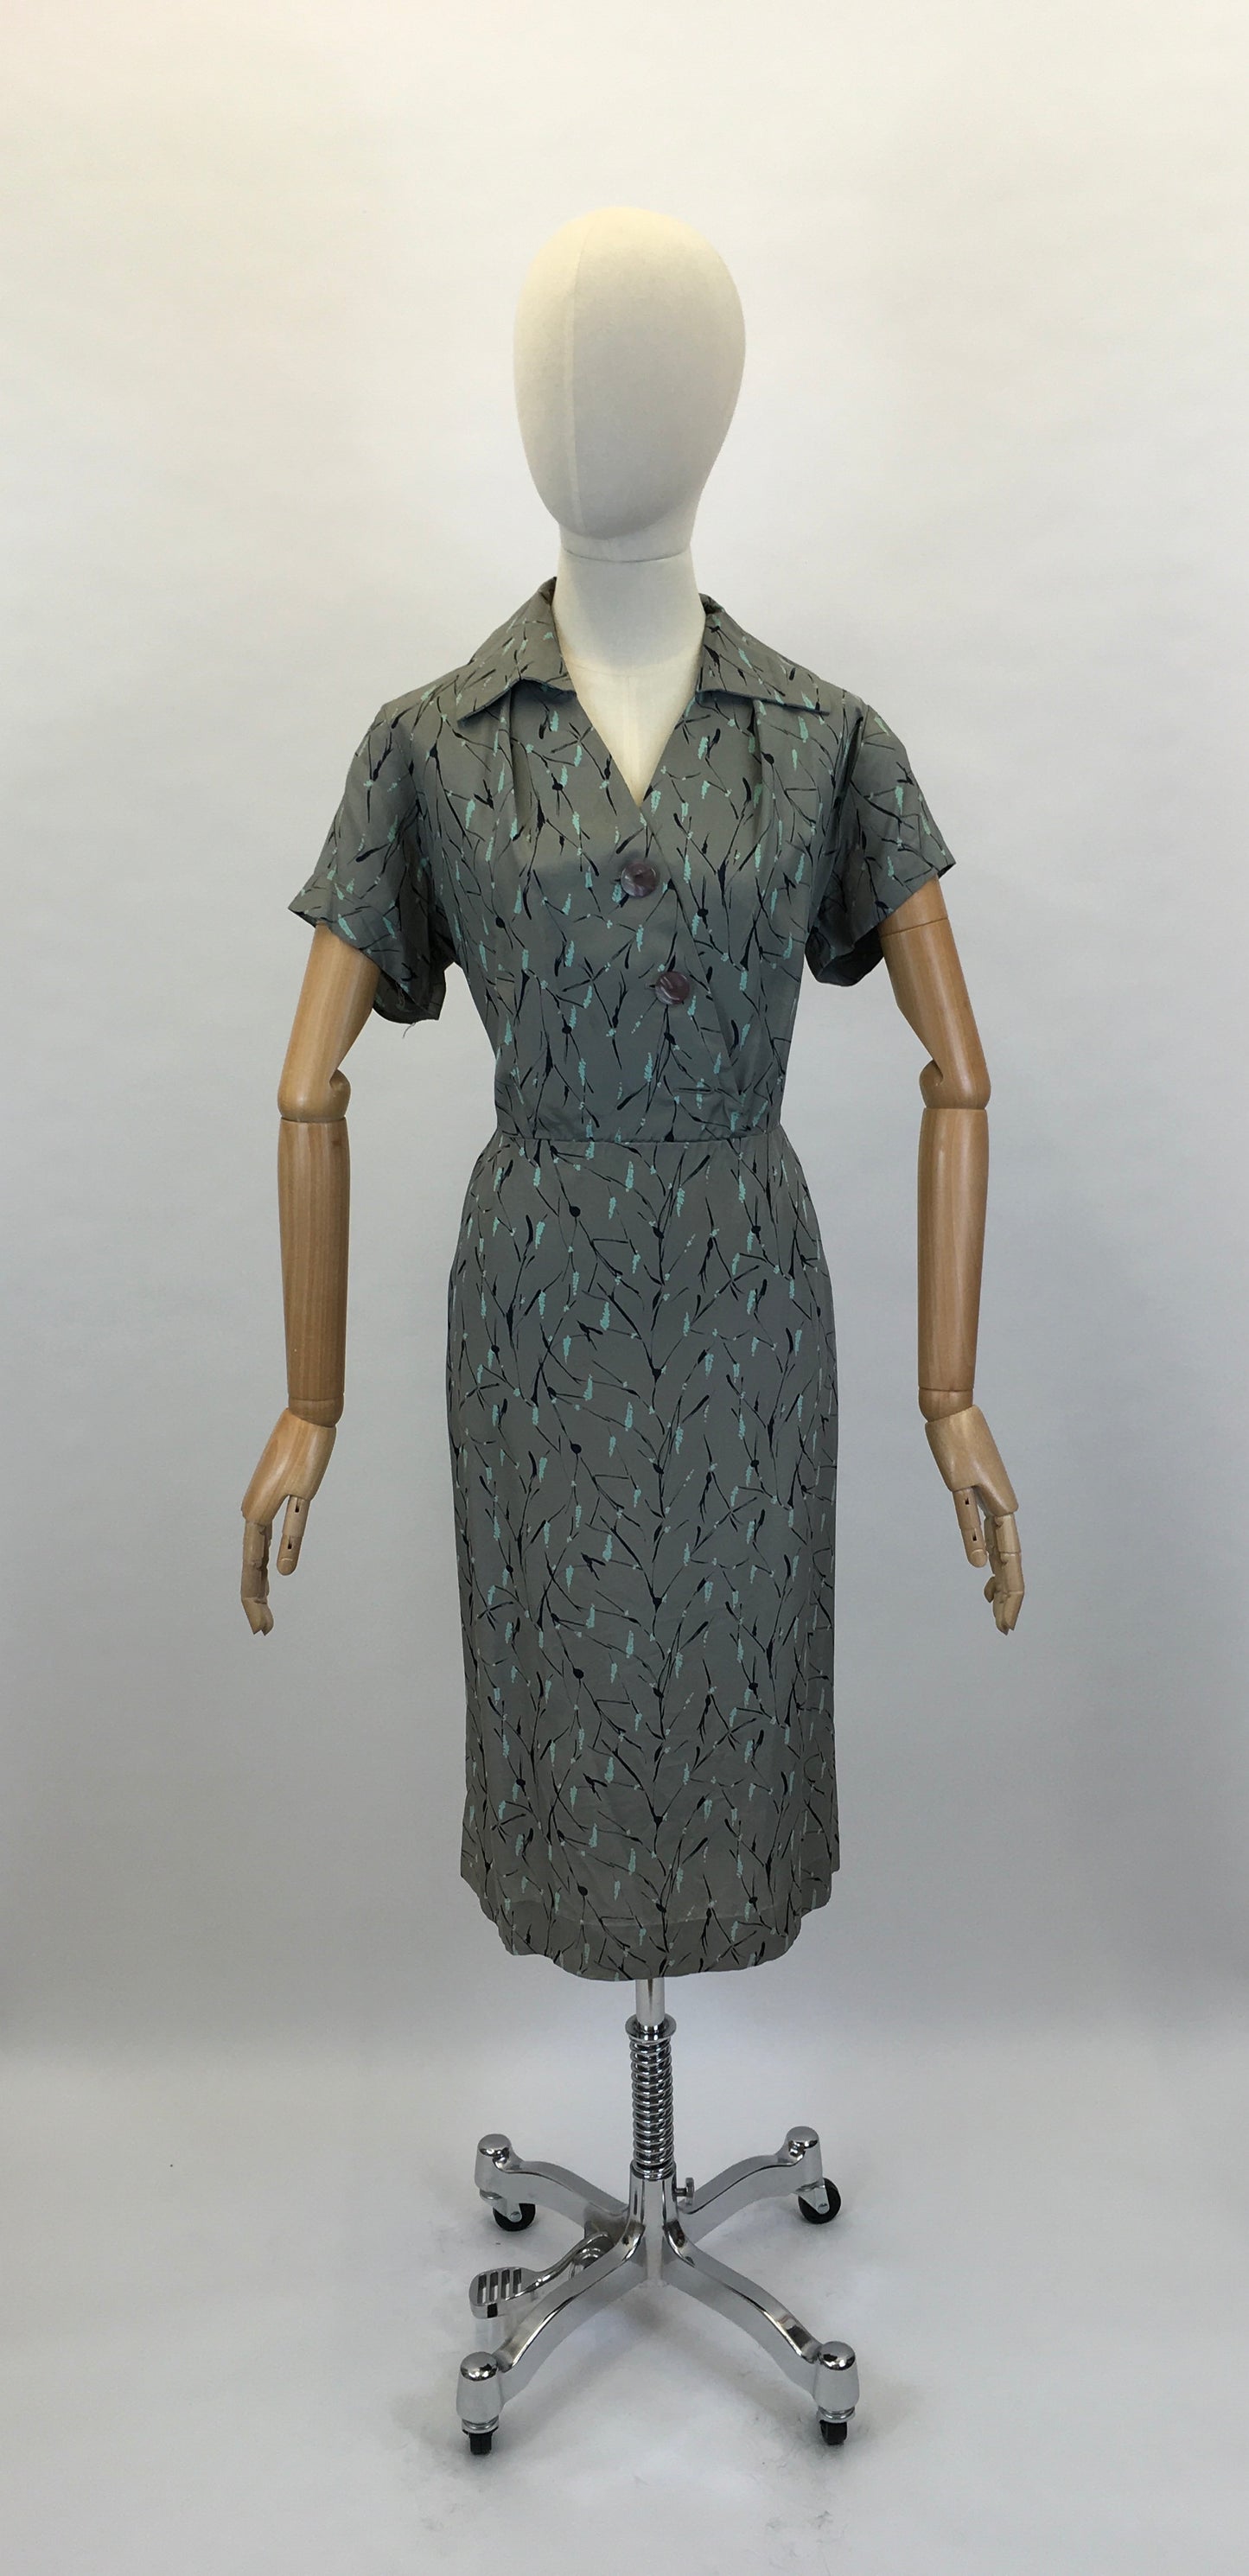 Original 1950’s Fabulous 2pc Dress & Jacket Set - In A Lovely Slate Grey with Turquoise and Black Print